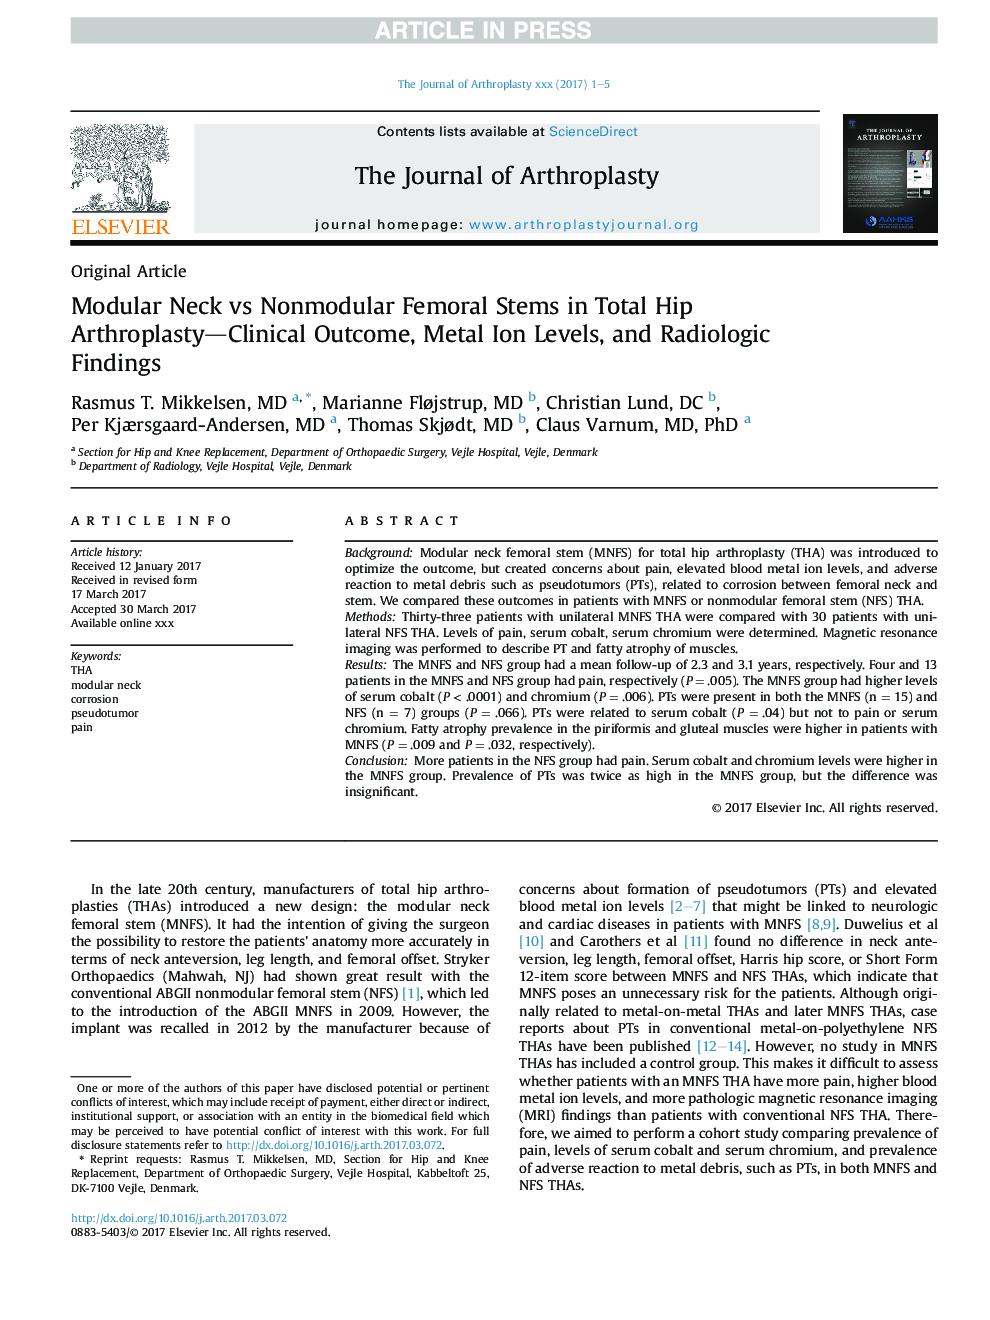 Modular Neck vs Nonmodular Femoral Stems in Total Hip Arthroplasty-Clinical Outcome, Metal Ion Levels, and Radiologic Findings